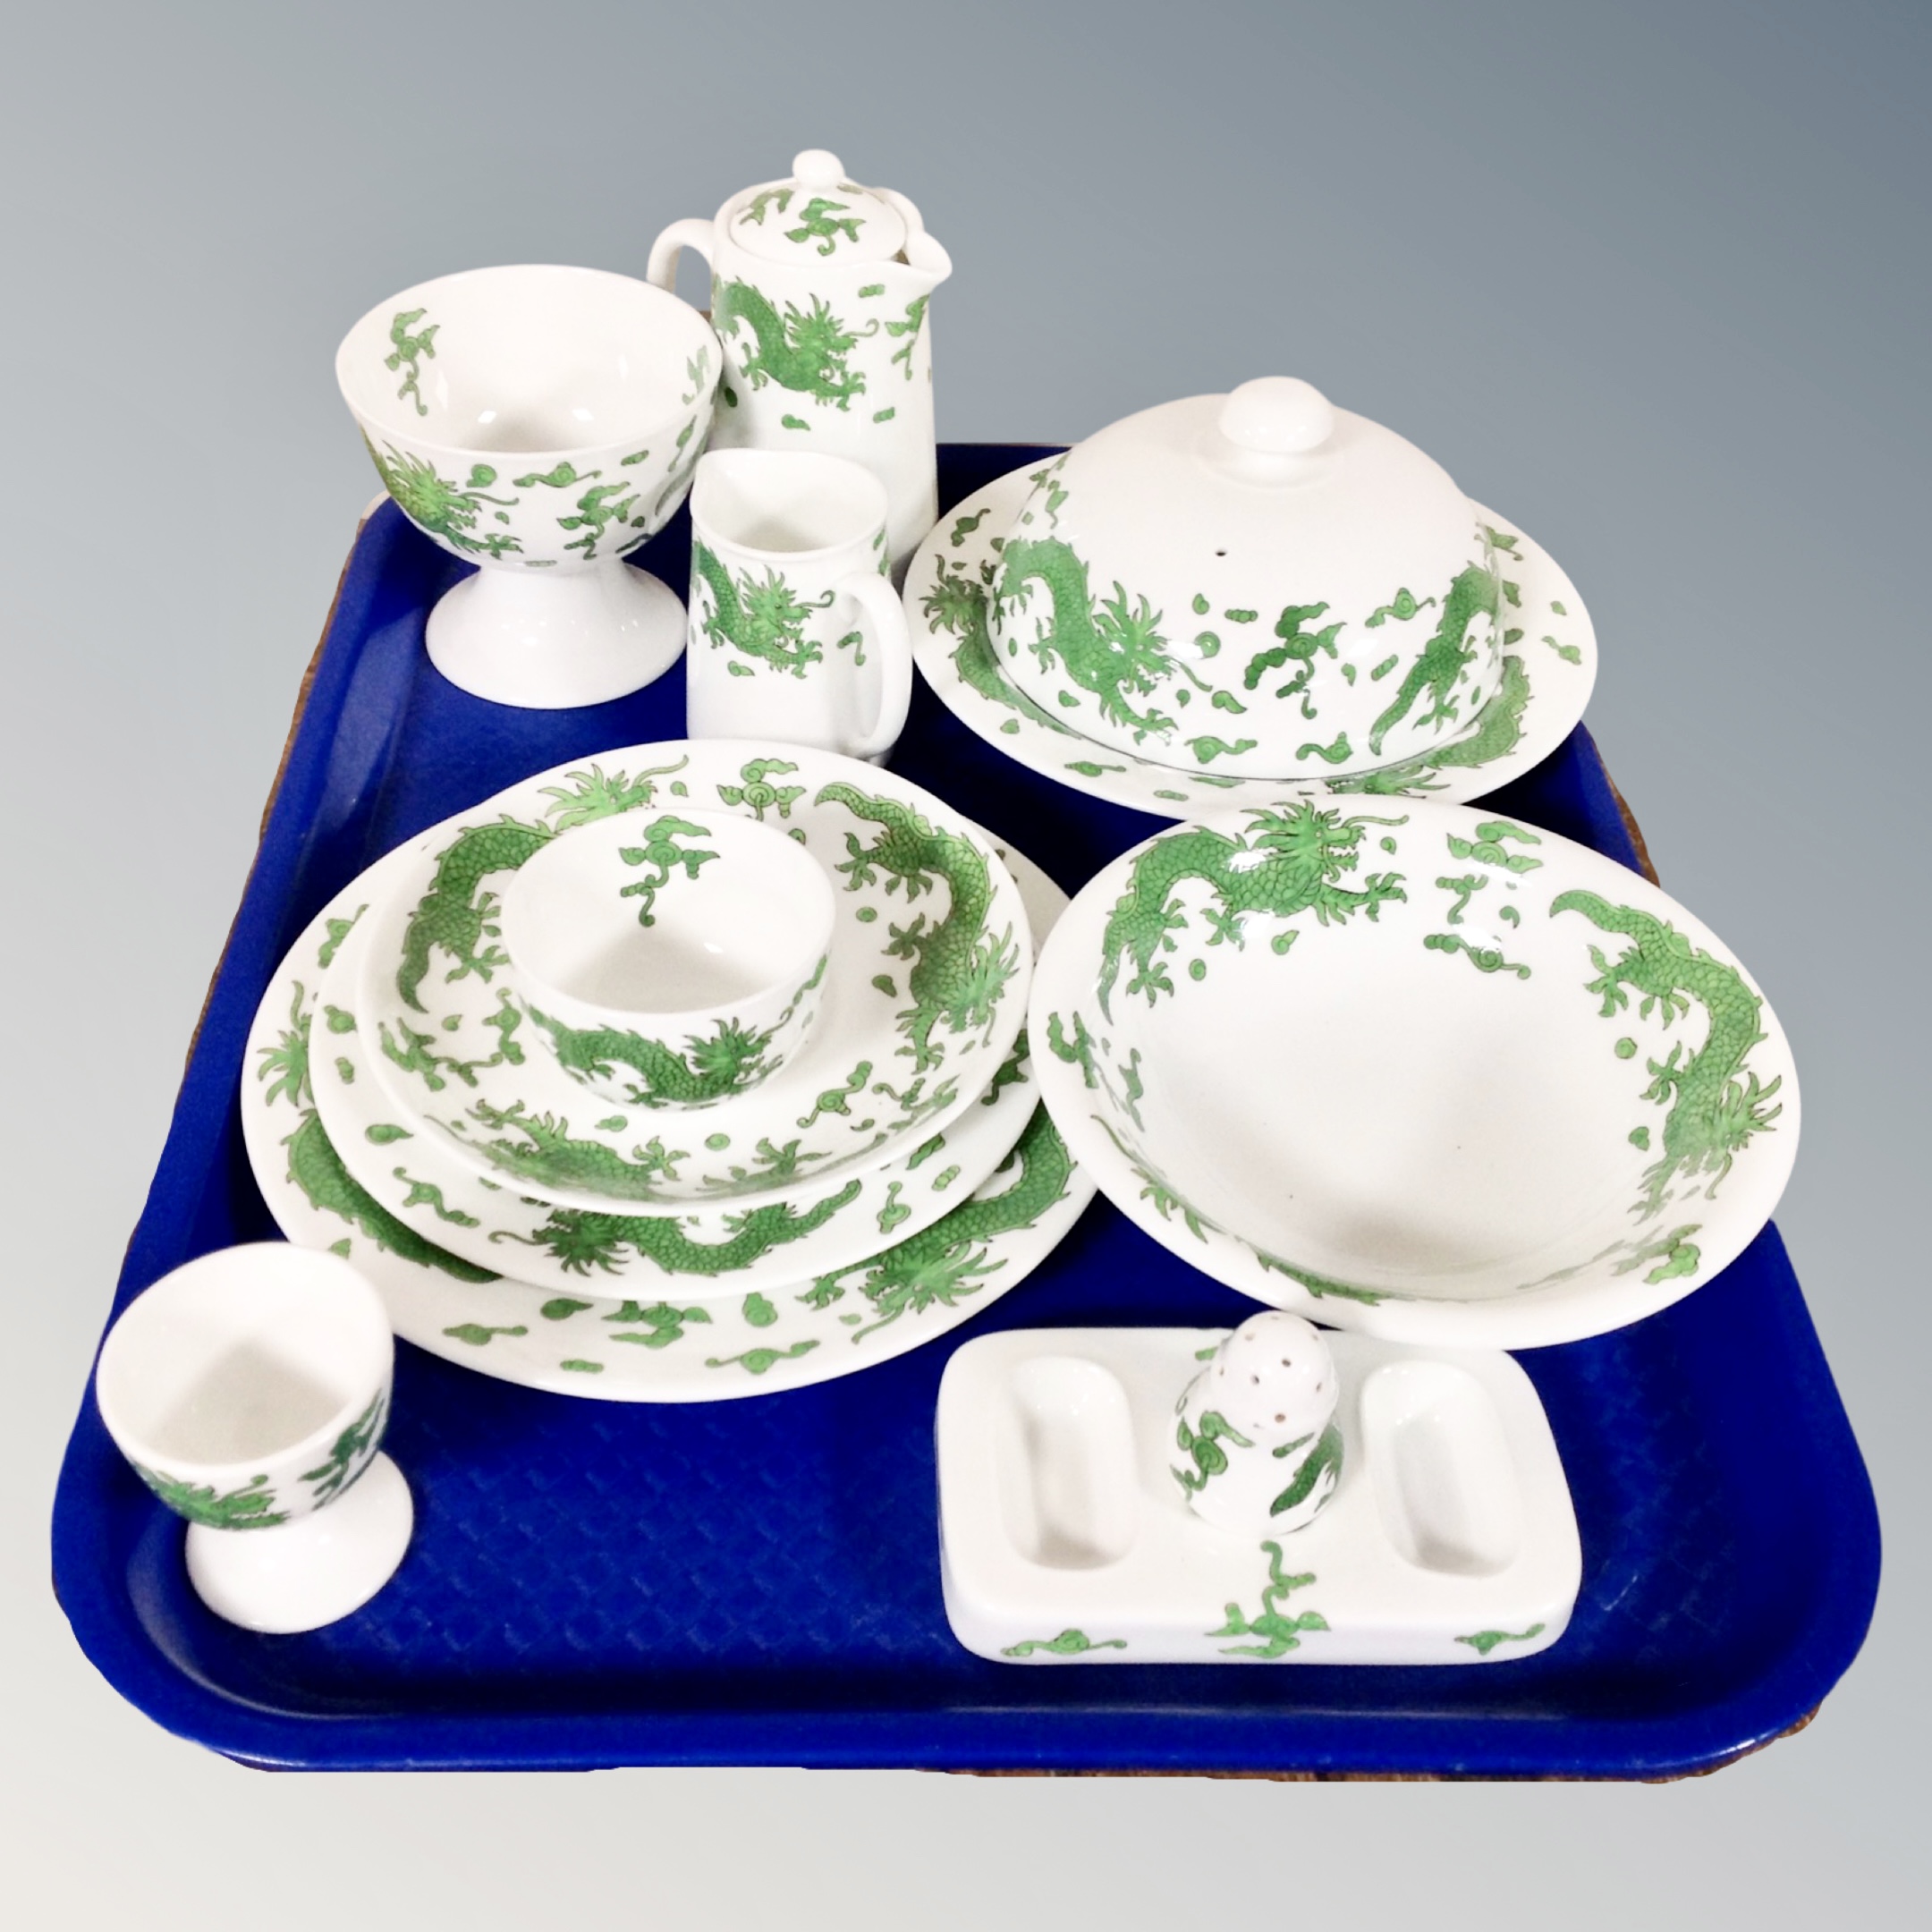 A tray of eleven pieces of Hammersley green dragon patterned tea china.